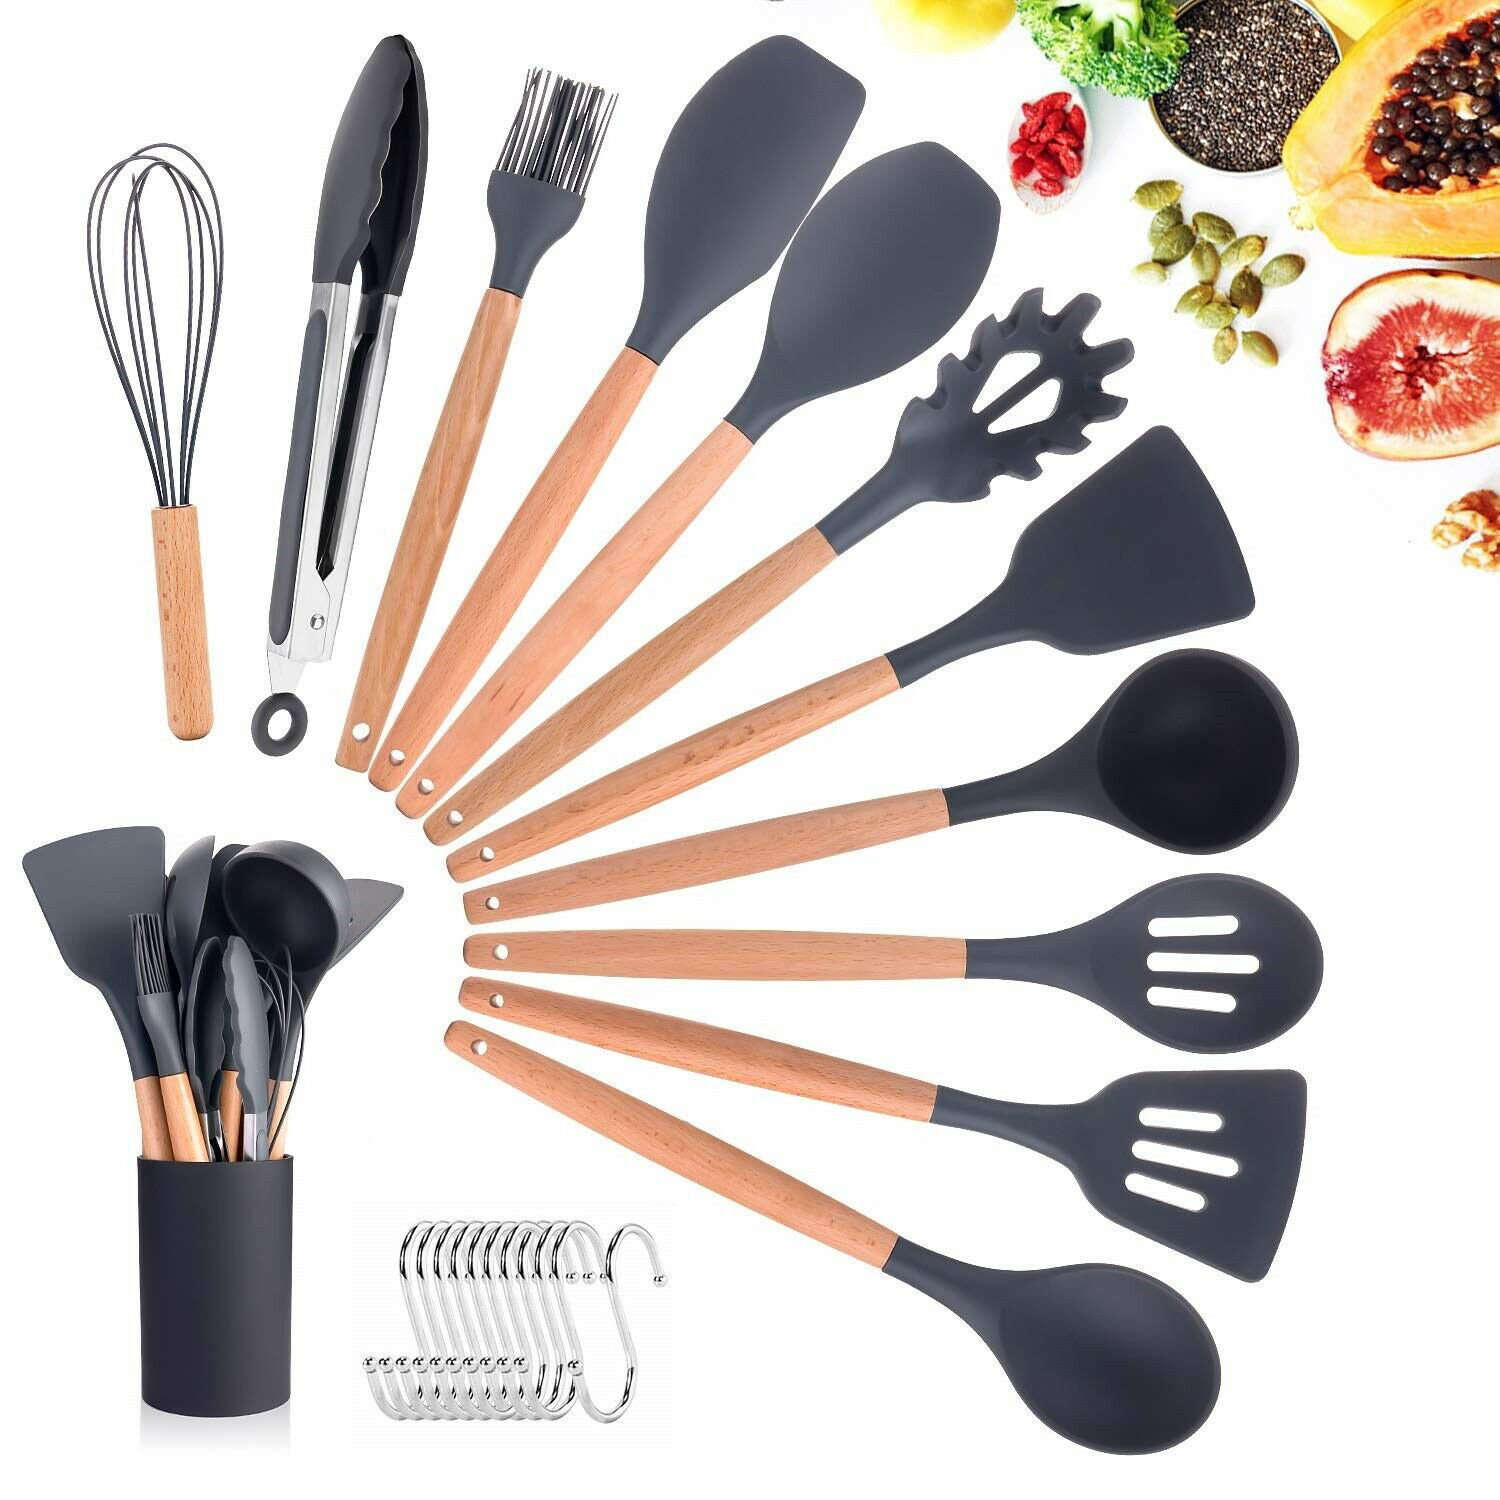 GreenPan 5 Piece Cooking Utensil Set, Flexible Nonstick Silicone, Stain-free, Tongs, Turner, Spatula, Skimmer, and Slotted Spoon, Black